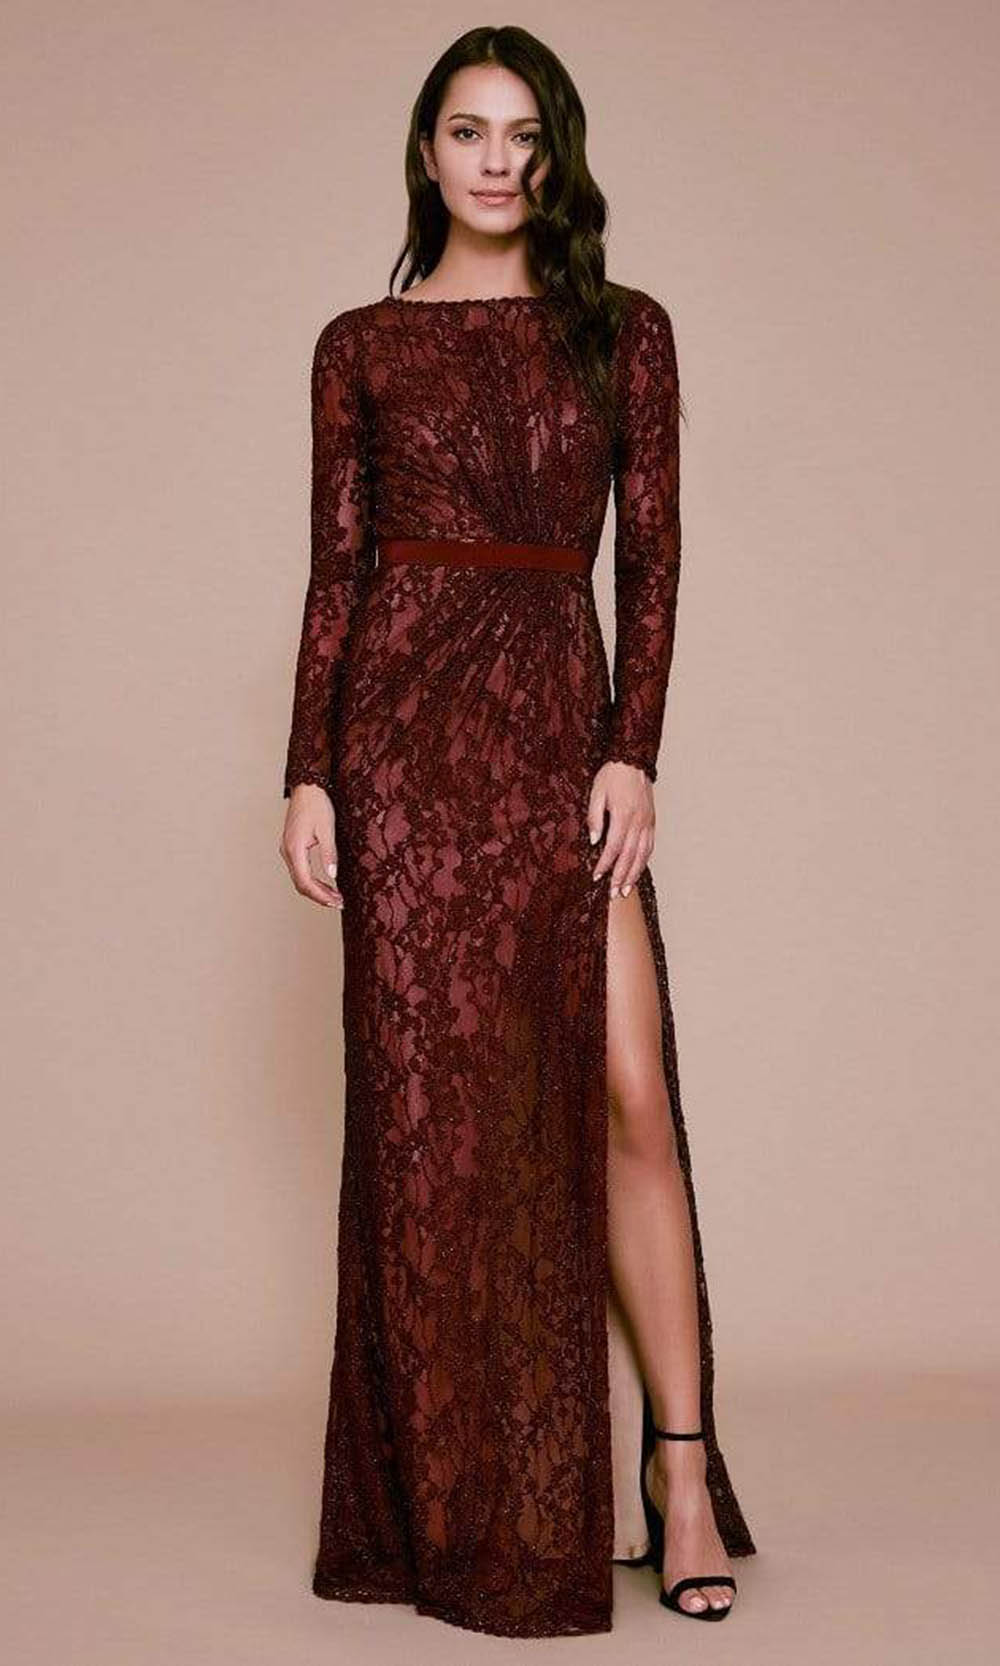 Tadashi Shoji - Allover Lace Bateau Long Sleeve Evening Dress - 1 pc Hibiscus/Nude In Size 10 Available CCSALE 10 / Hibiscus/Nude